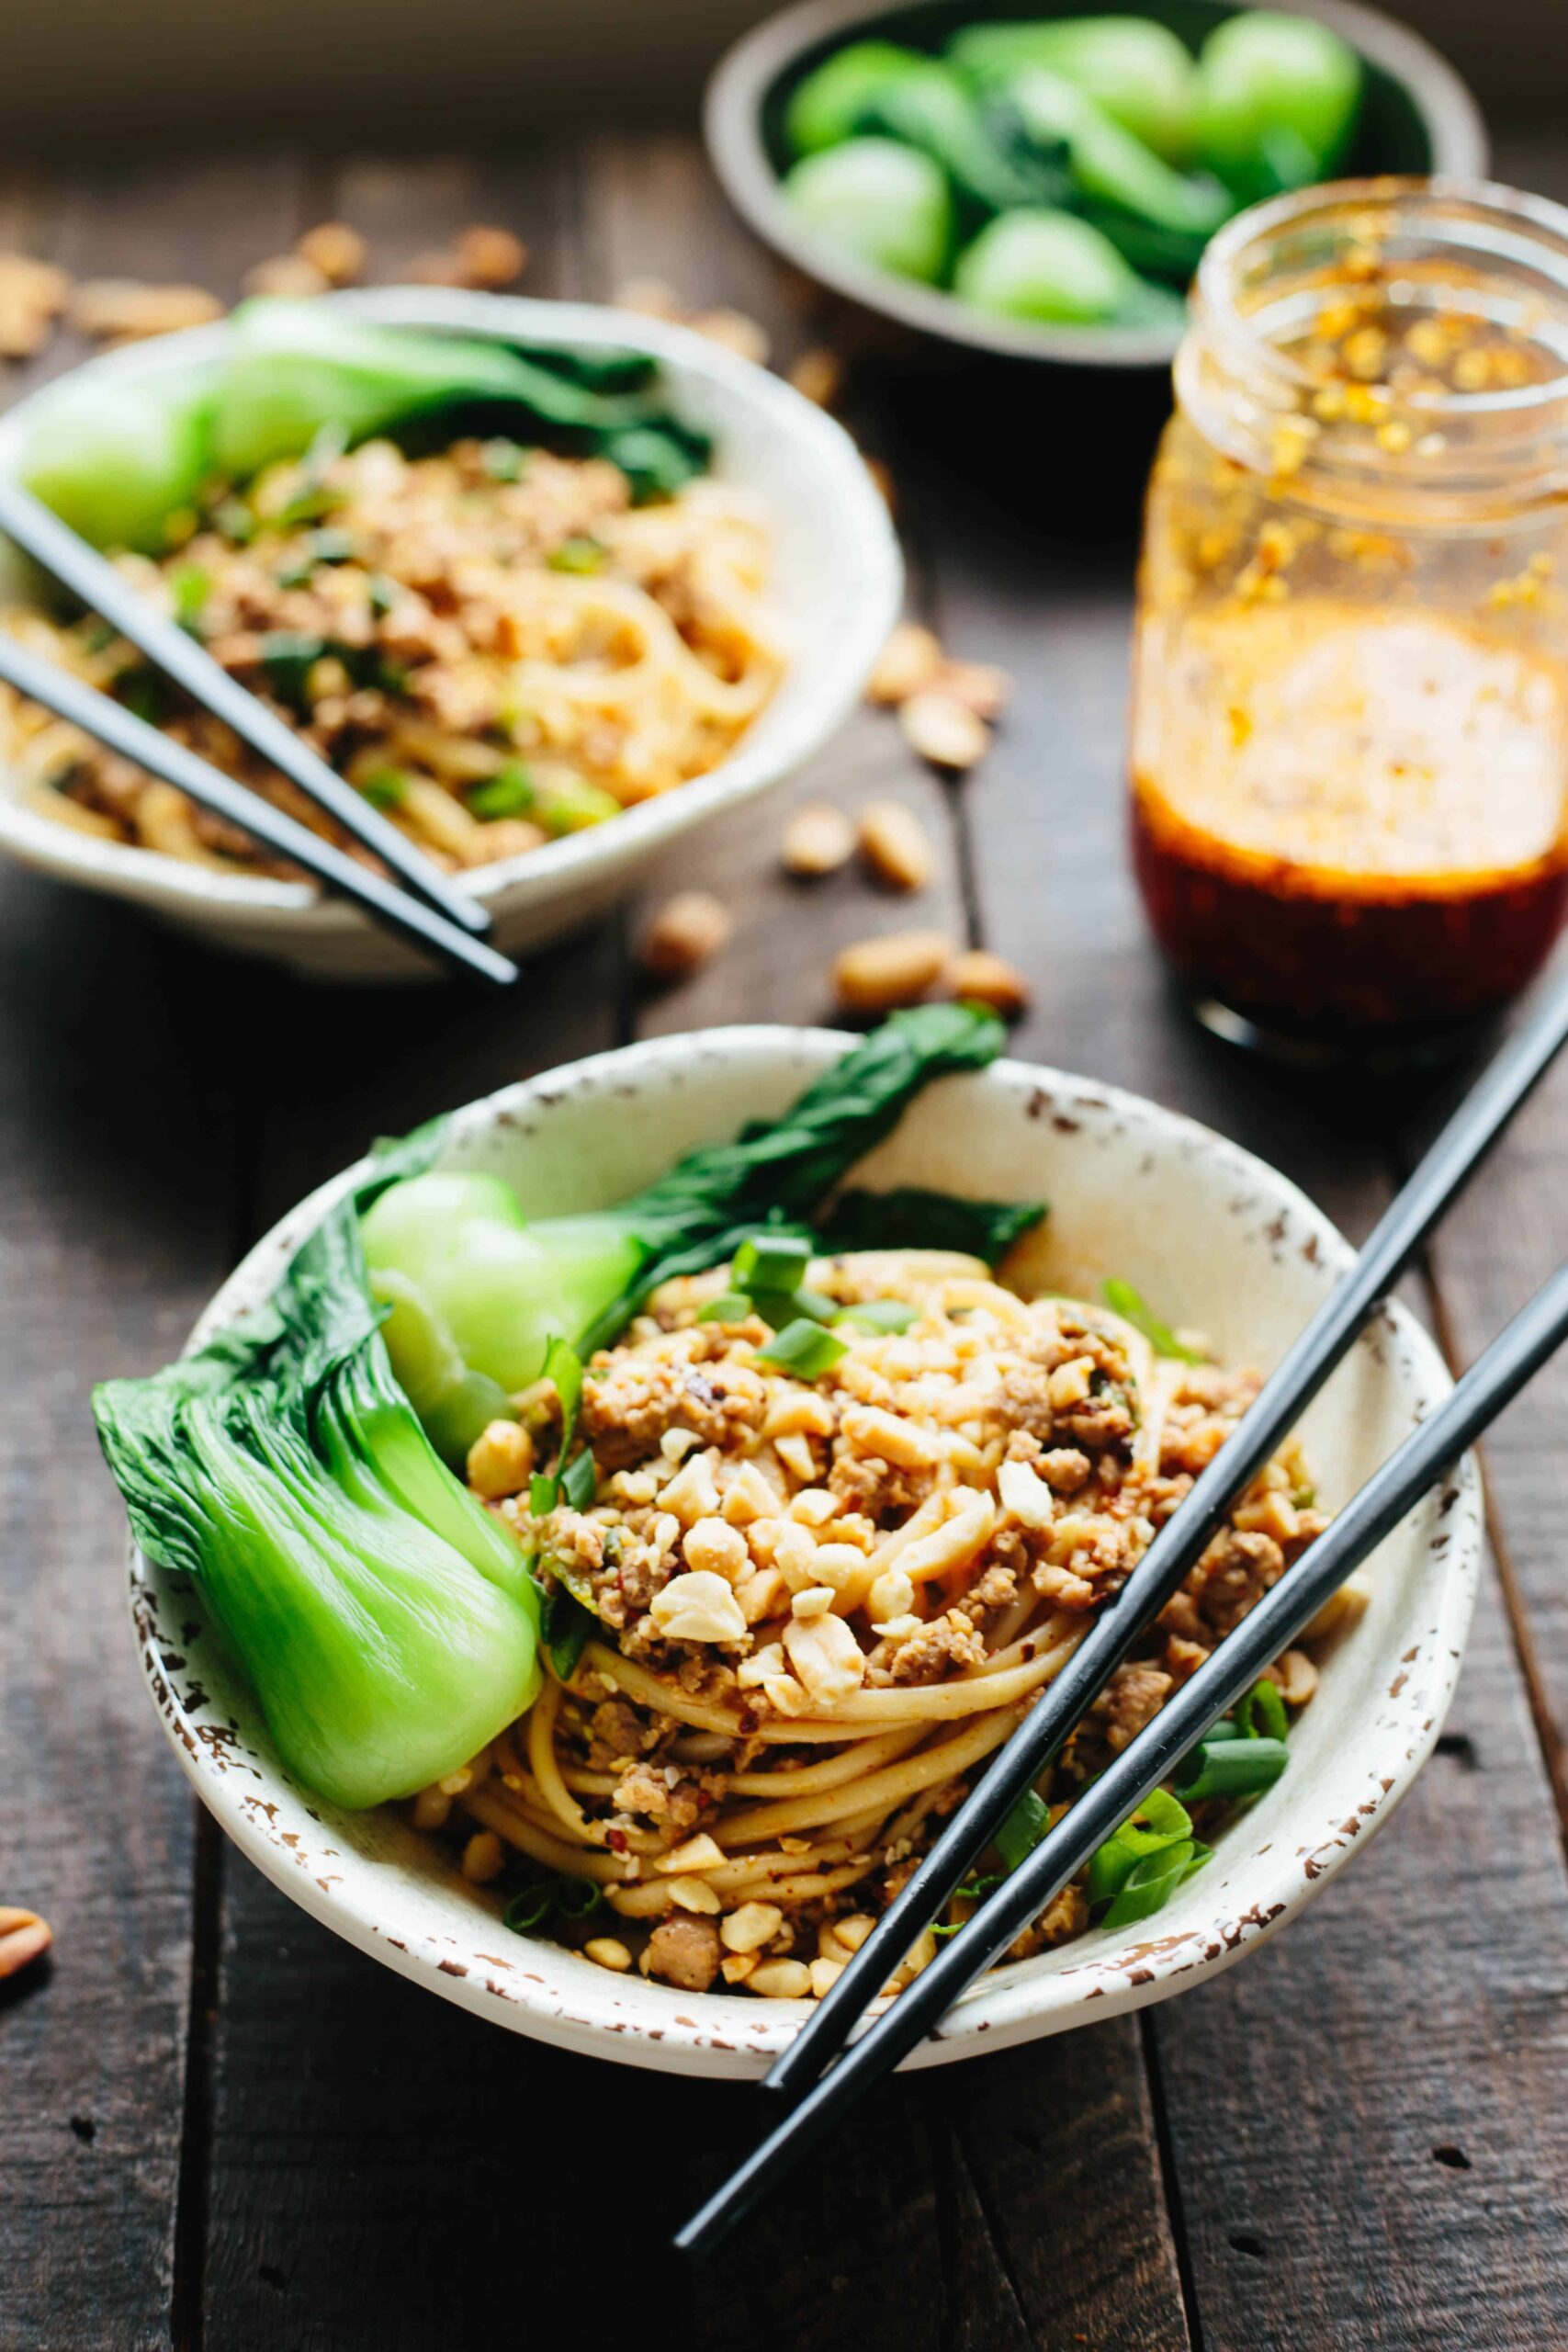 A bowl of dan dan noodles and baby bok choy with chopsticks.